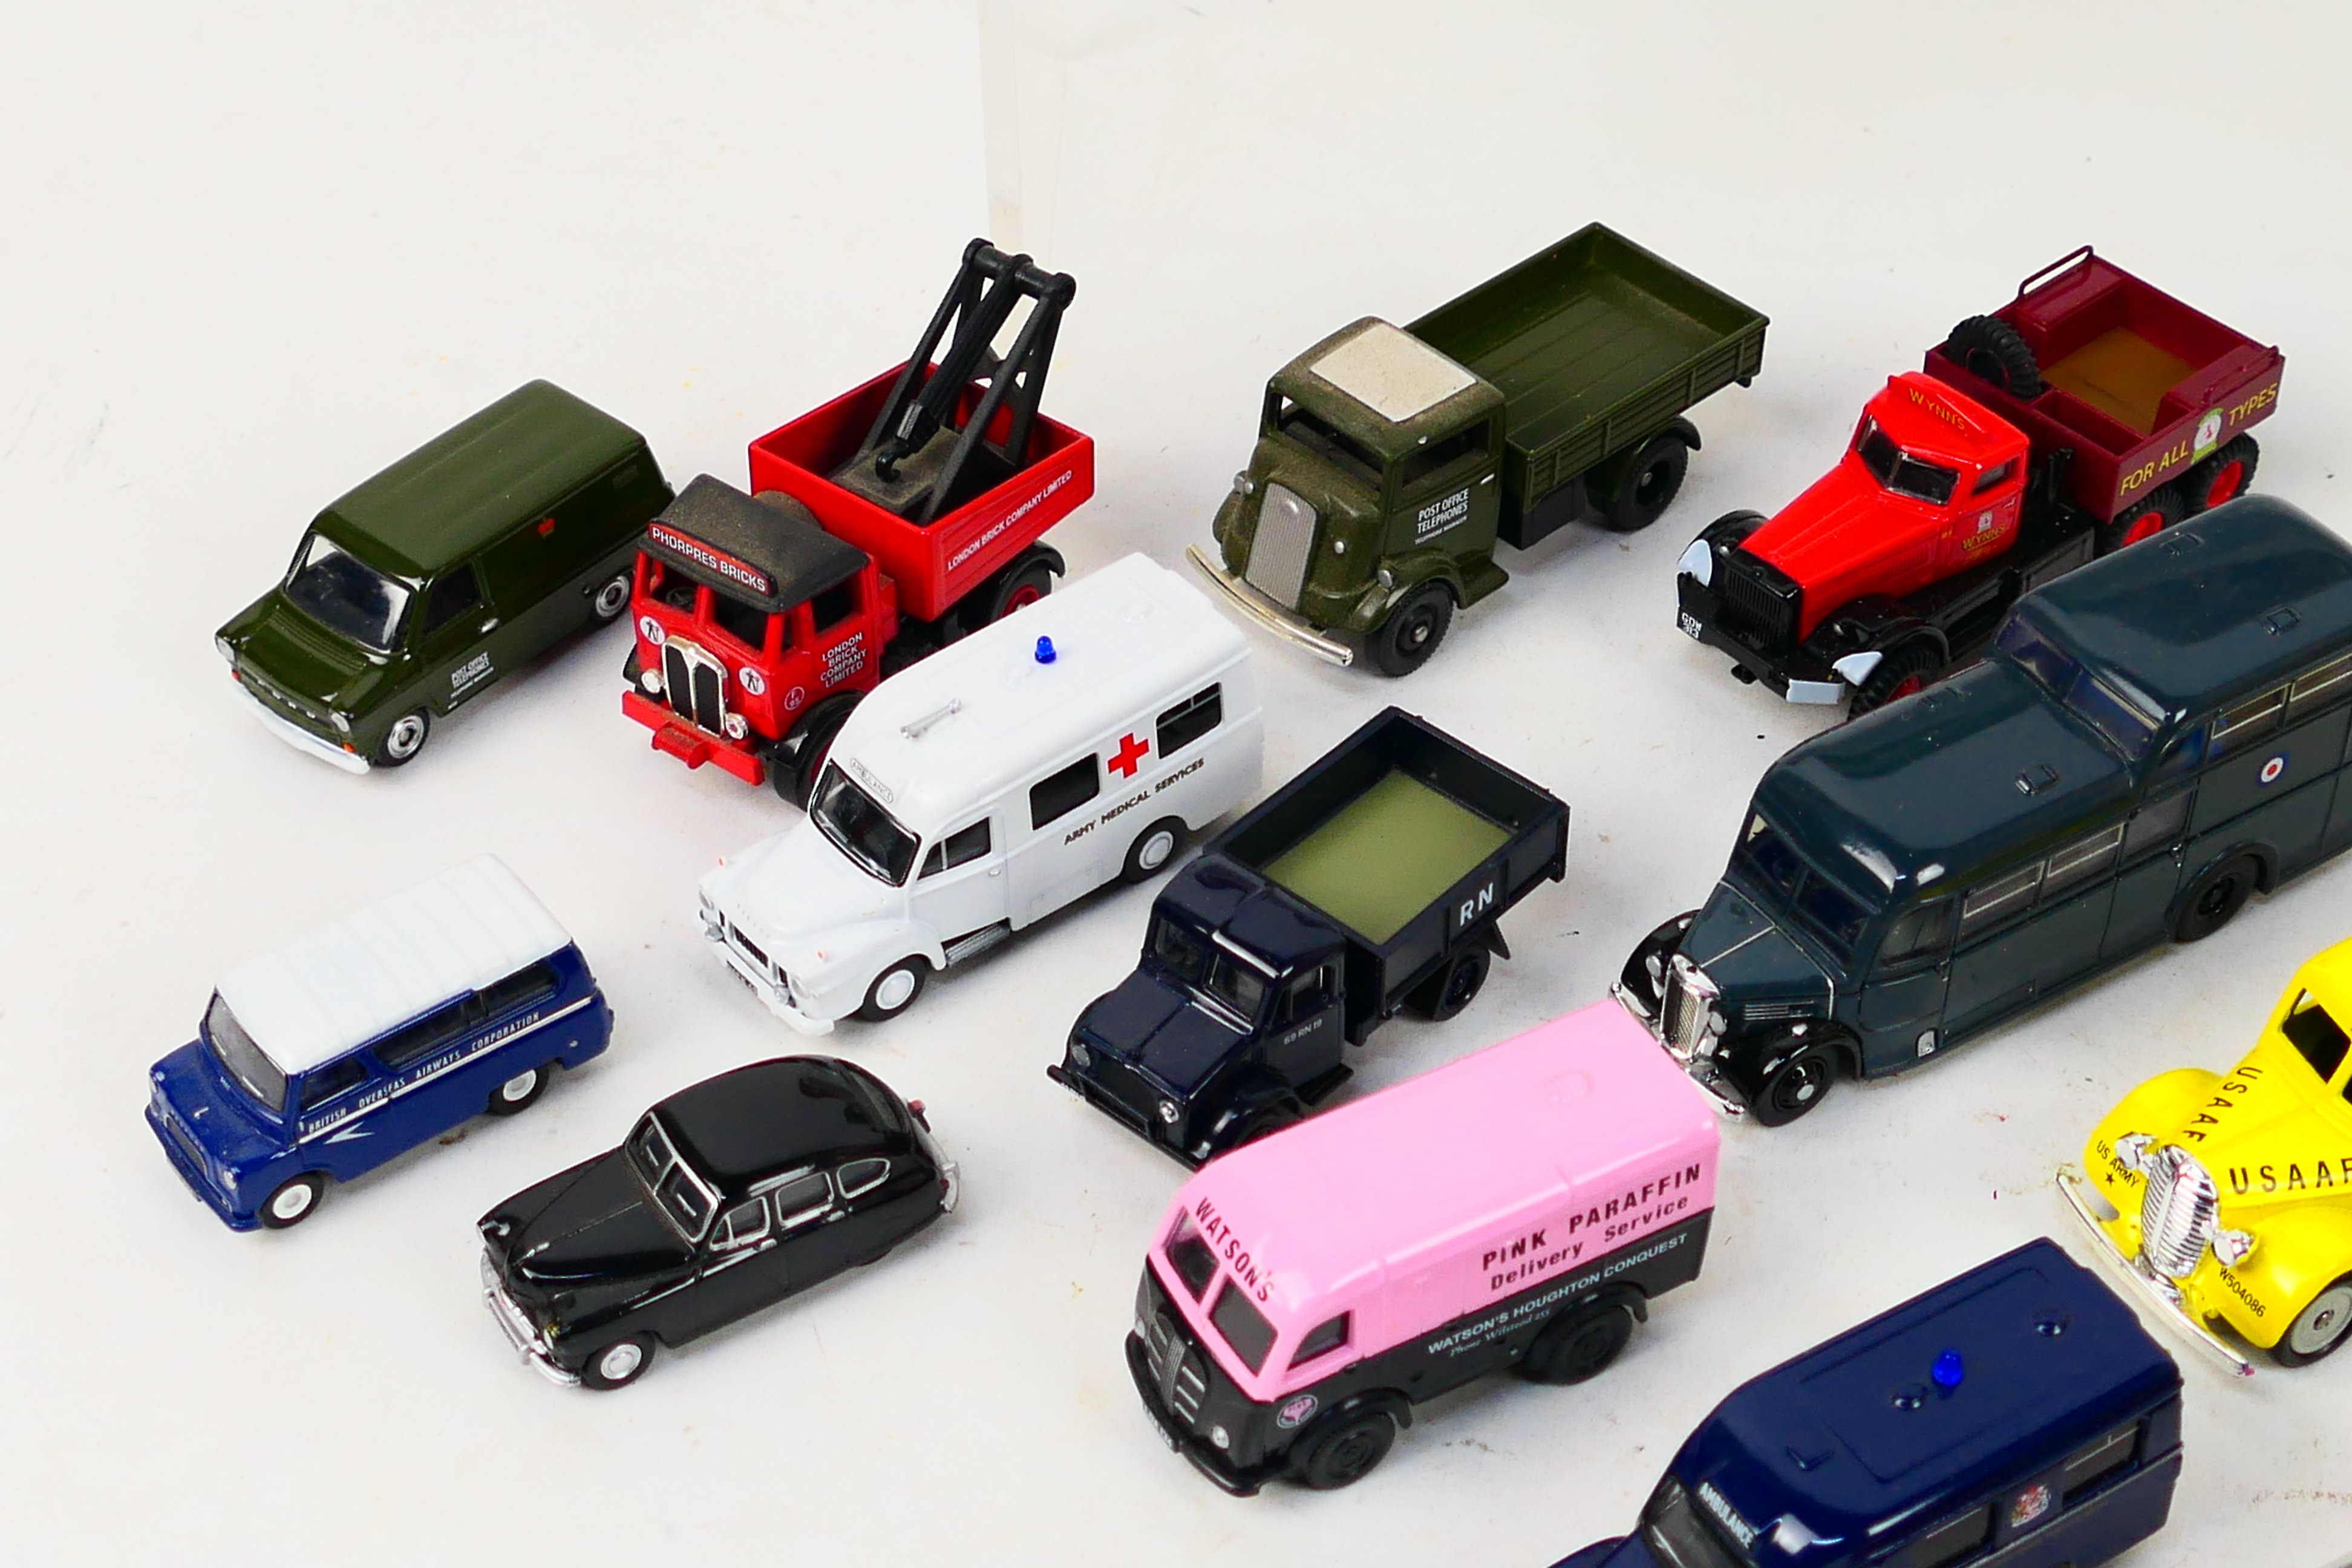 Oxford Diecast - Classix - Corgi - Lledo - Approximately 30 diecast model vehicles in various - Image 3 of 6